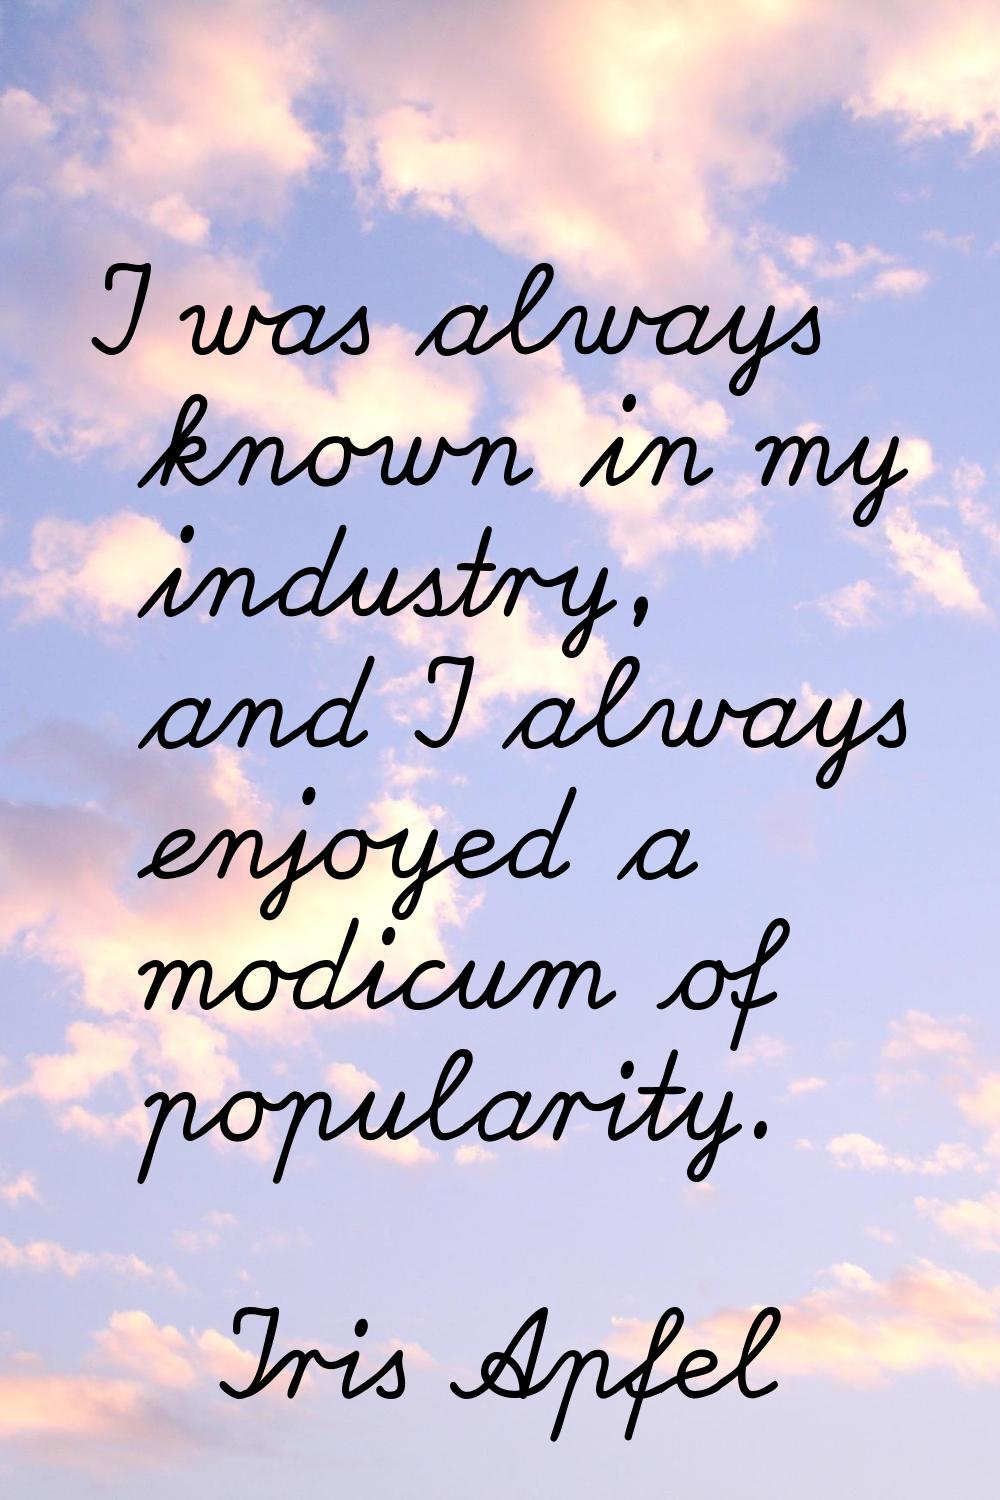 I was always known in my industry, and I always enjoyed a modicum of popularity.